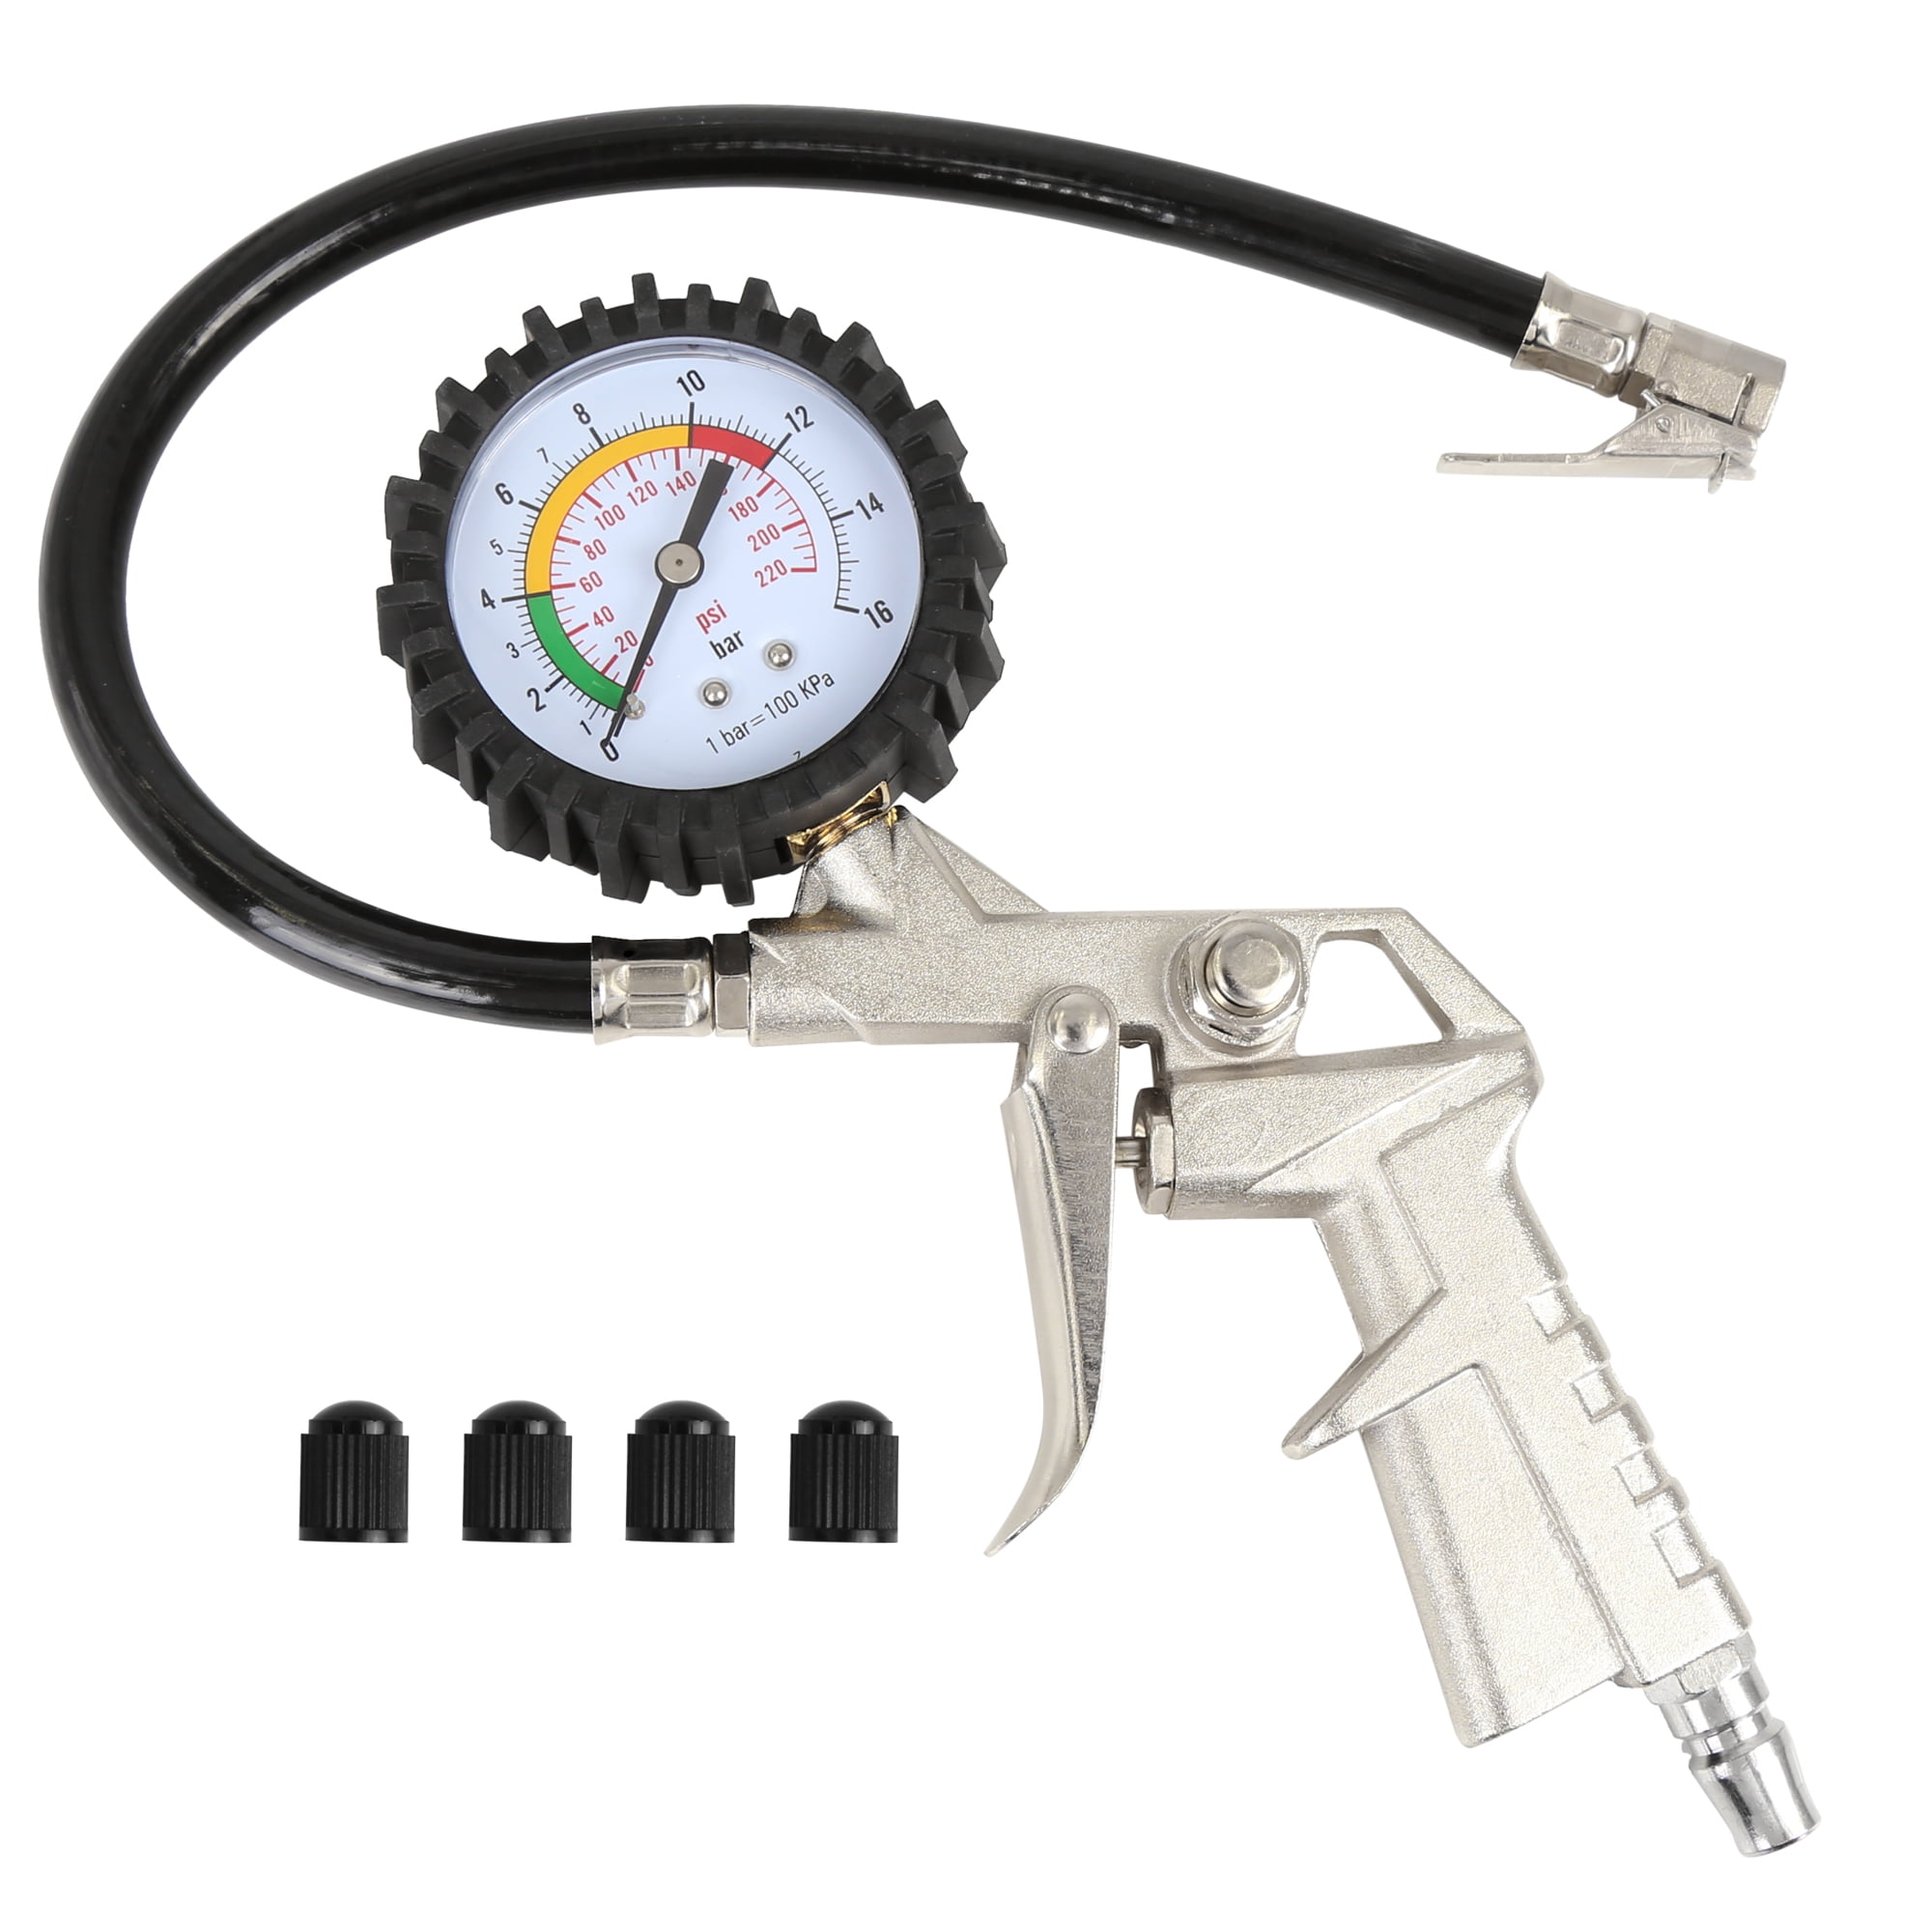 AstroAI Tire Inflator with Pressure Gauge White 100 PSI Air Chuck Compressor Accessories Mechanical Heavy Duty with Rubber Hose and Quick Connect Coupler